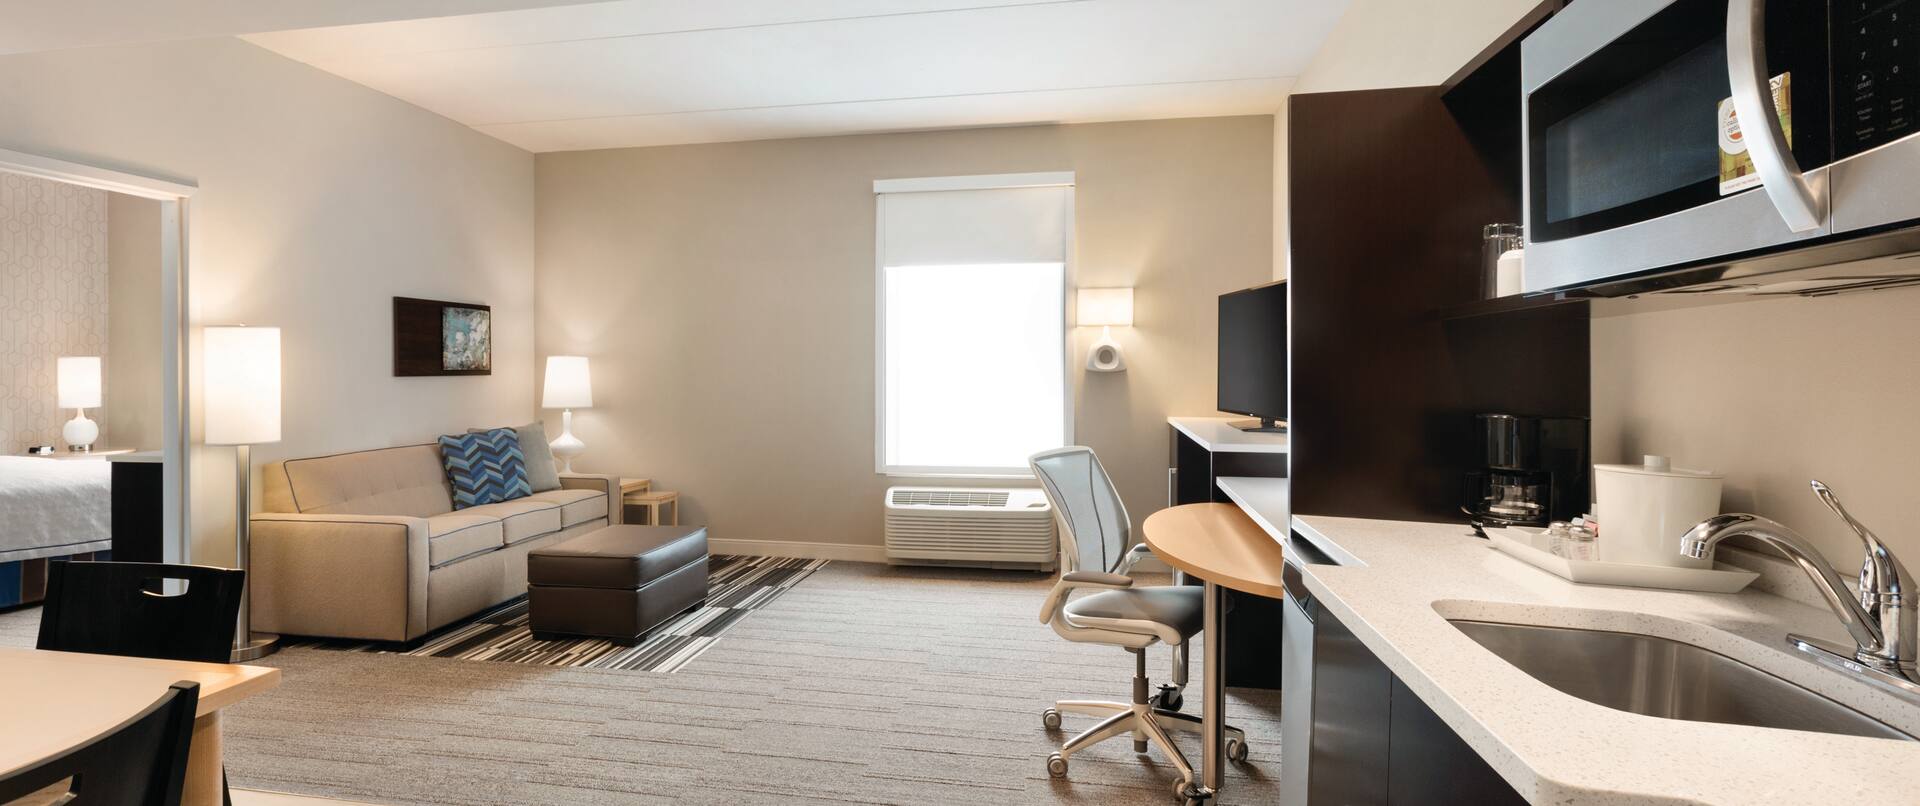 Home2 Suites by Hilton Nashville Franklin Cool Springs Hotel, TN - One Queen One Bedroom Suite